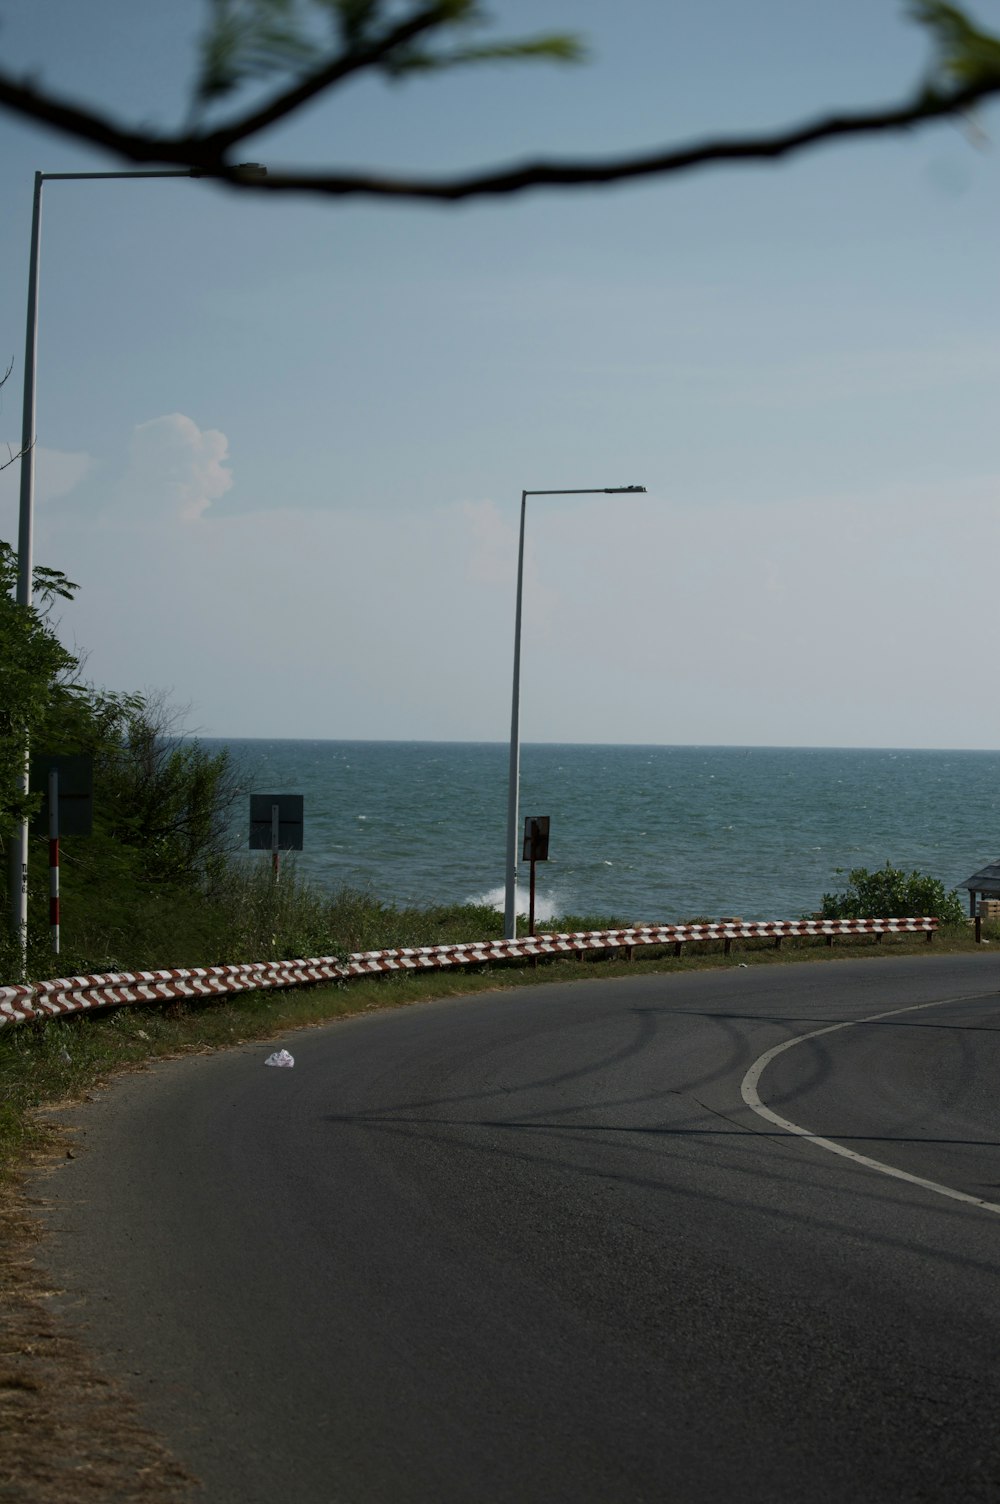 a curve in the road near the ocean